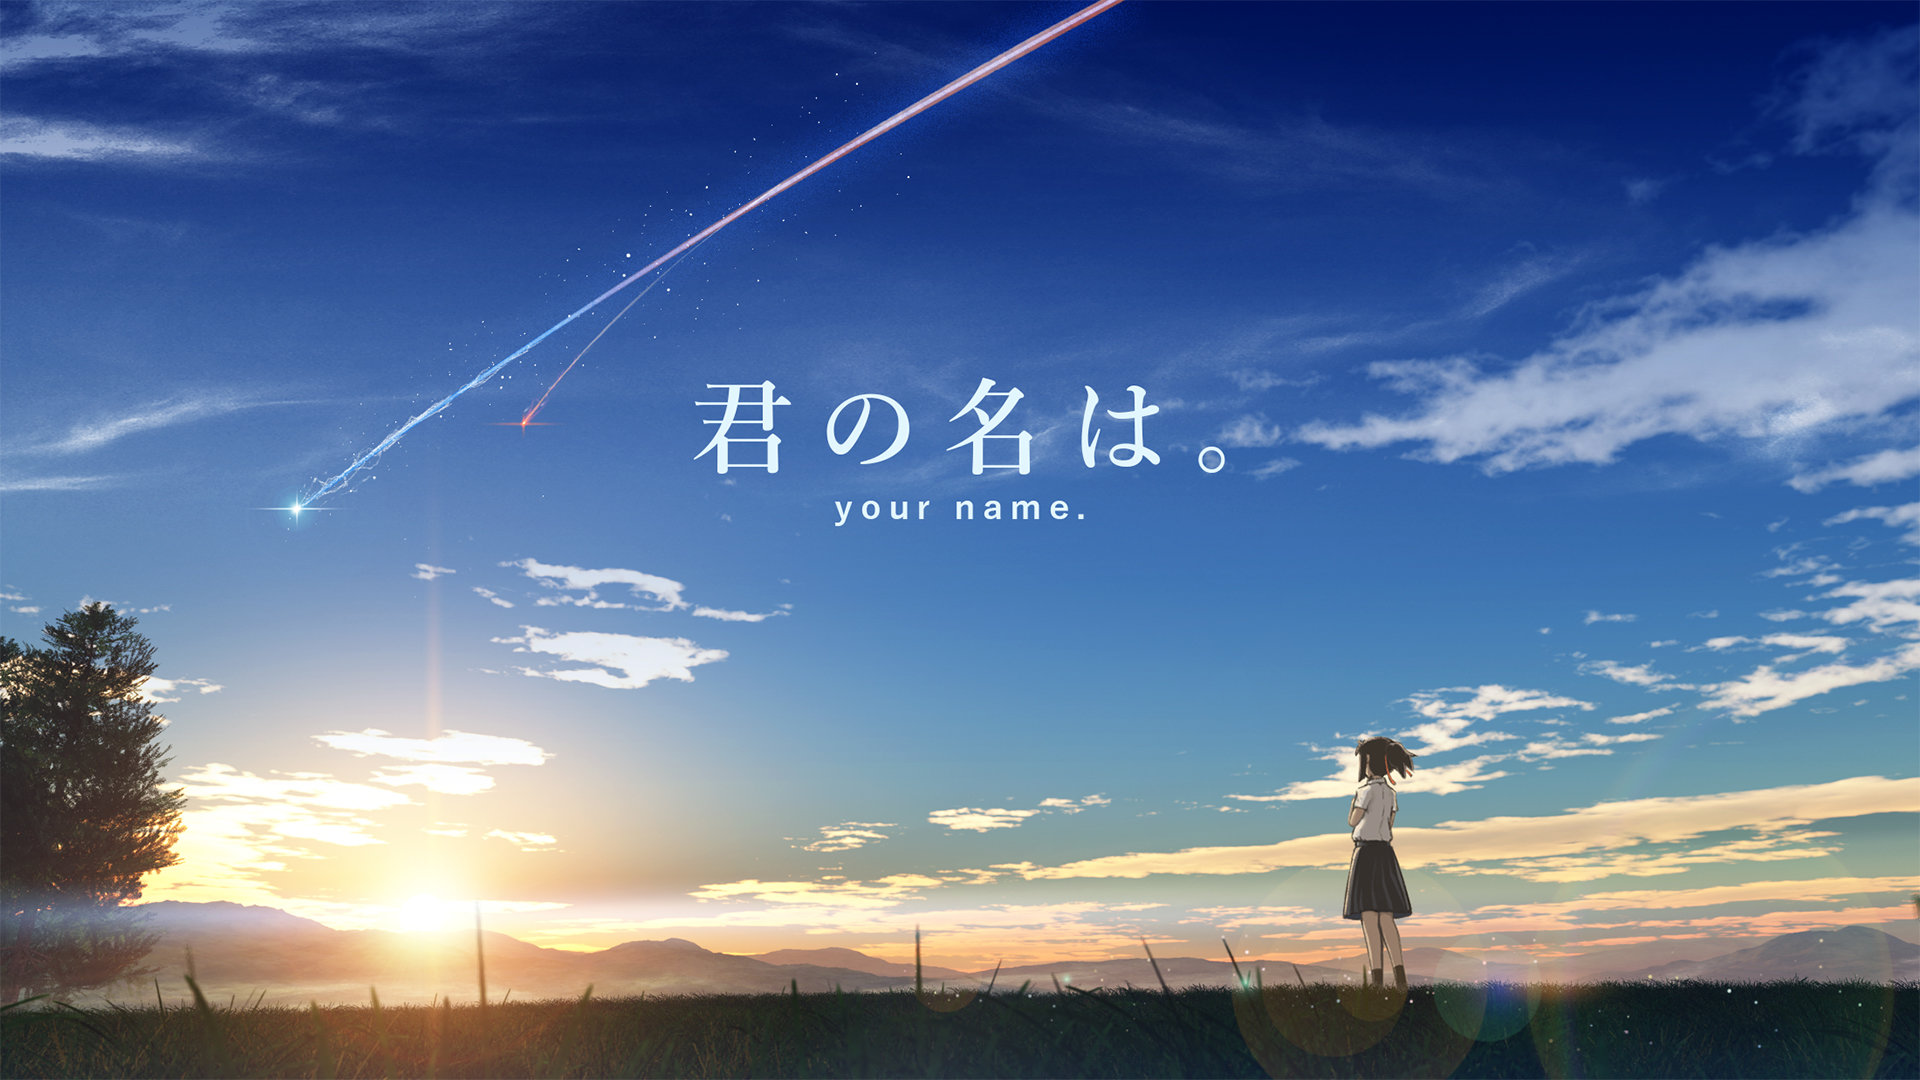 BEST WALLPAPER: Your Name Wallpaper Pc